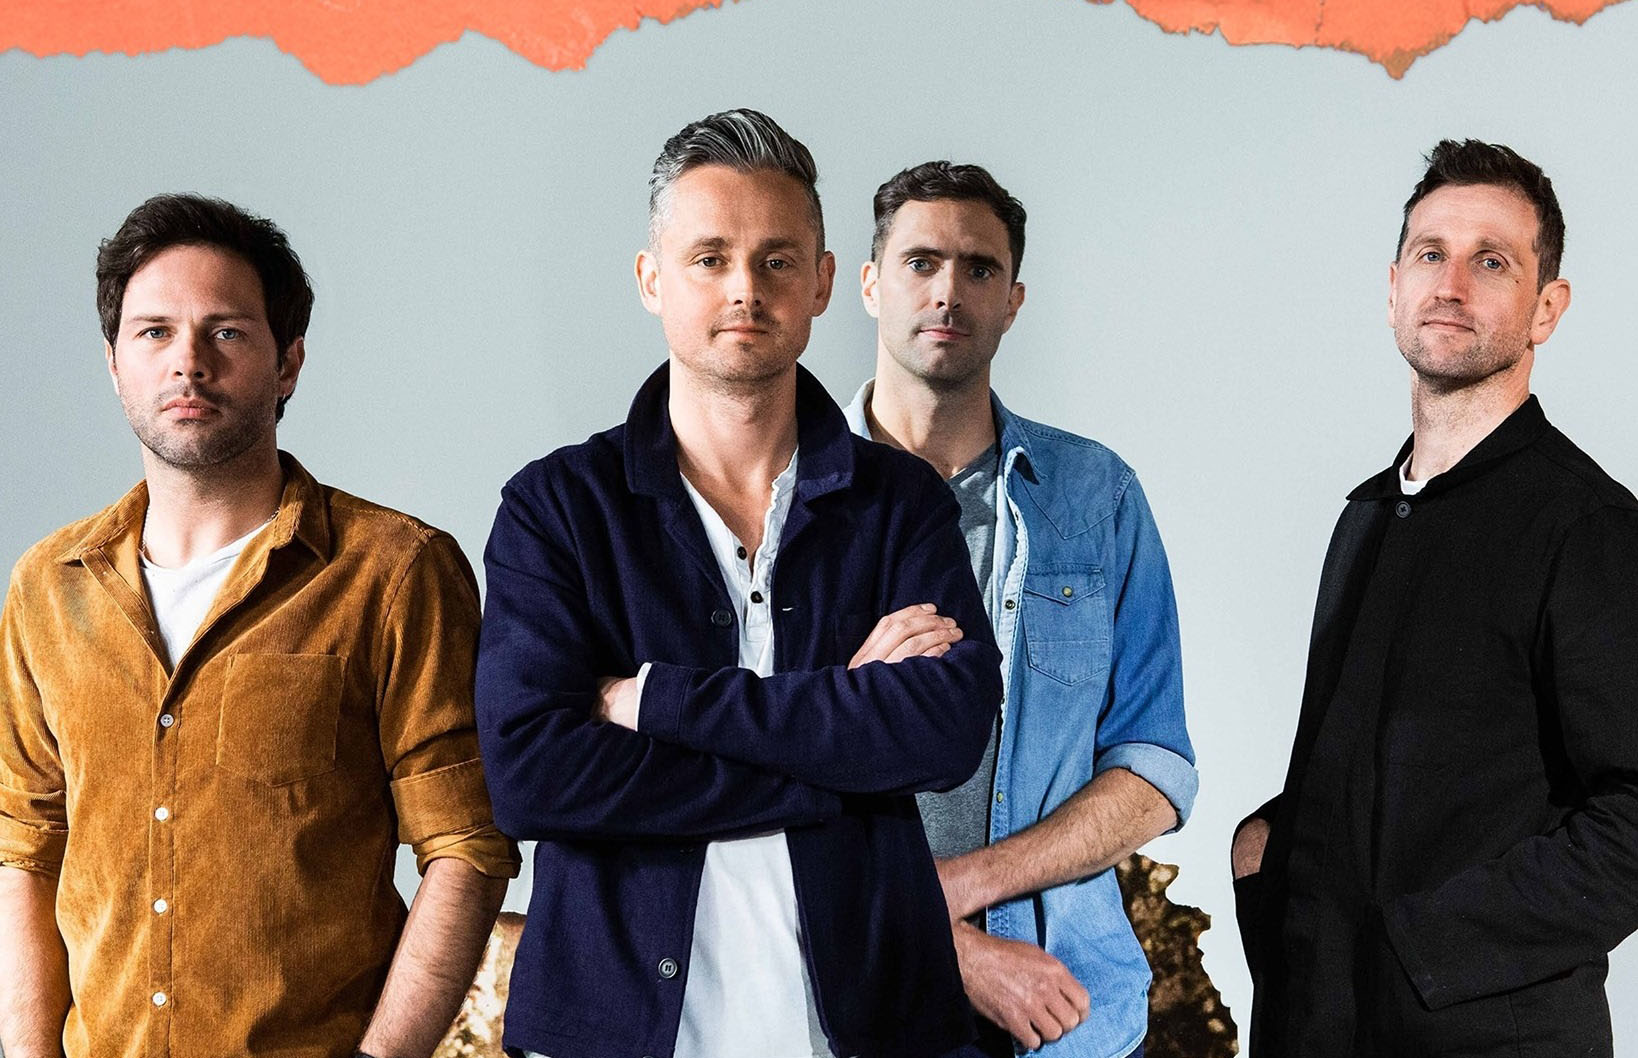 KEANE to play concert at the Hop Farm, Kent on 19 June 2022 